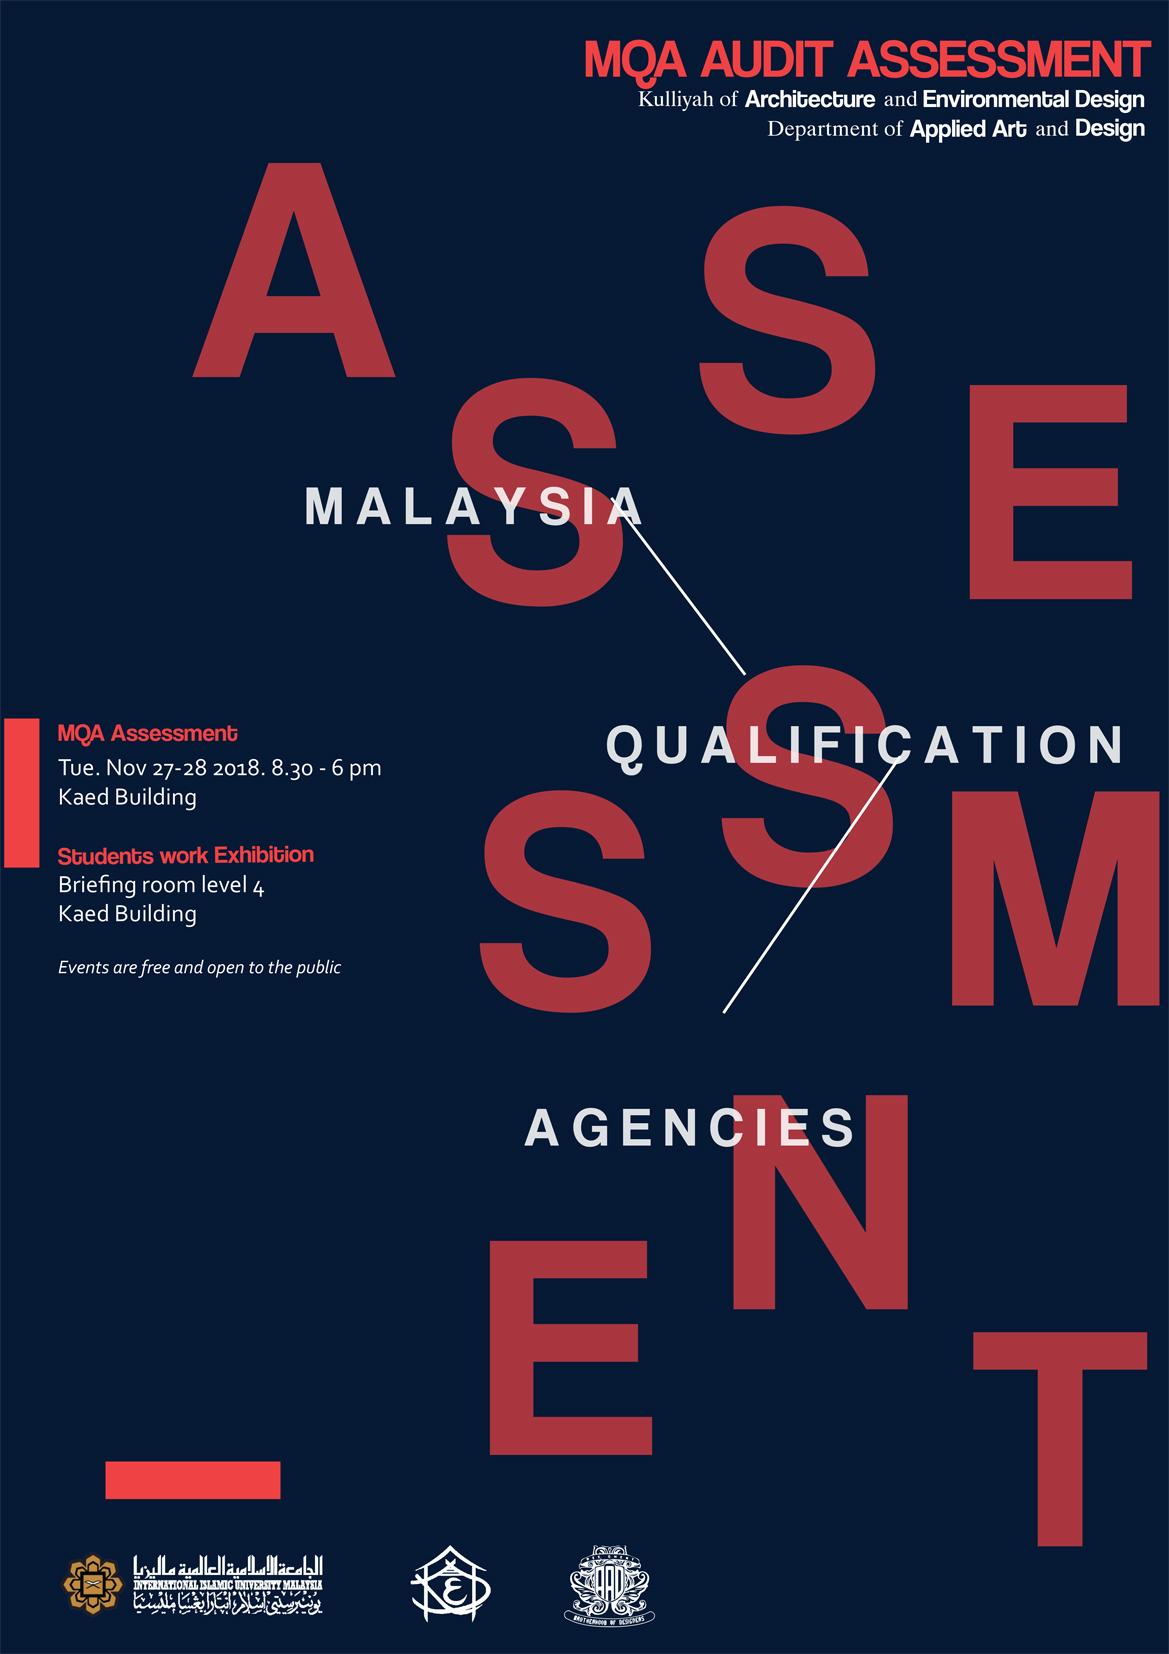 MQA Audit Assessment 2018 for Department of Applied Arts and Design